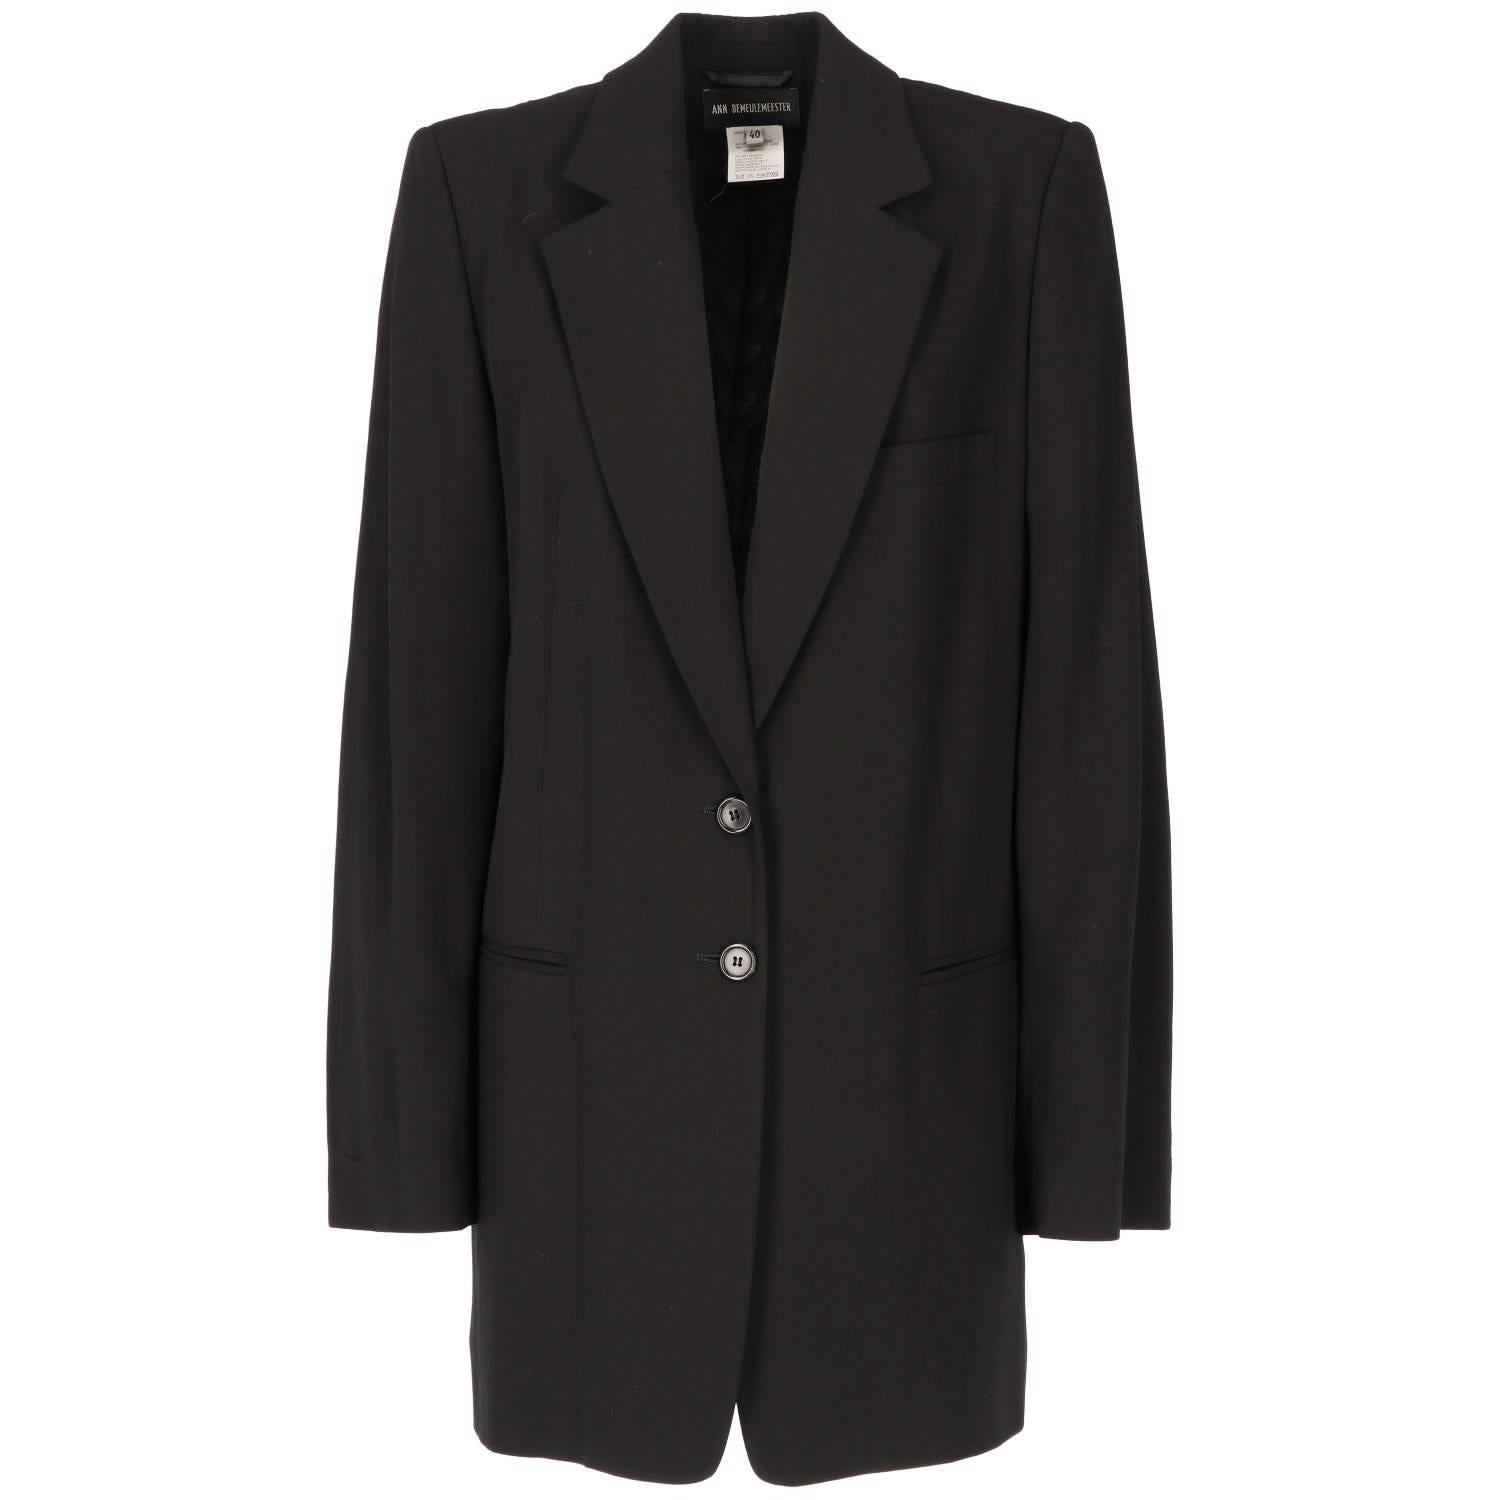 Ann Demeulemeester long black blend wool jacket. Deep plunge neckline with revers and frontal buttons fastening. Lightly padded shoulders. A welt pockets on each side and one pockets on the jacket's left upper part. Buttons cuffs fastening. Rib on